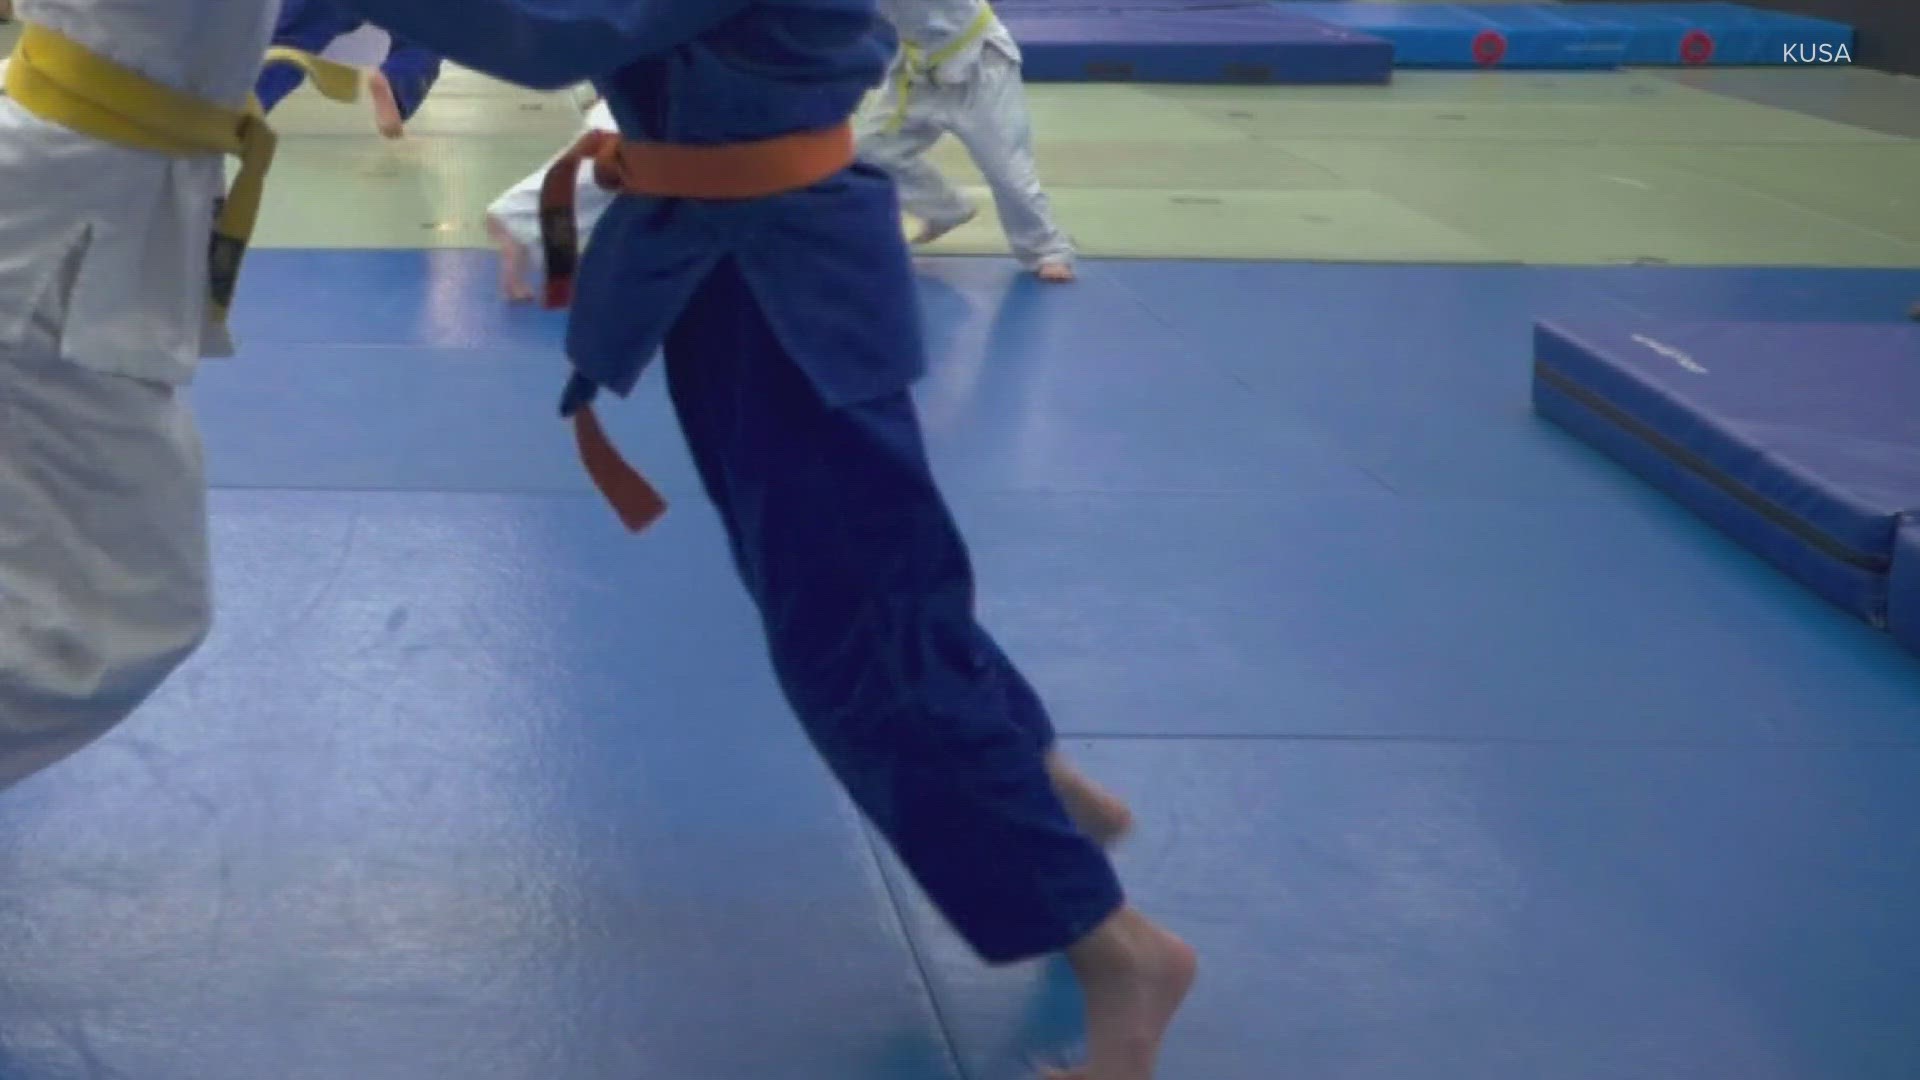 A juvenile prosecutor is now looking into the case of that teen, who was a Judo student at the Phoenix Gym in Bellevue, according to police.